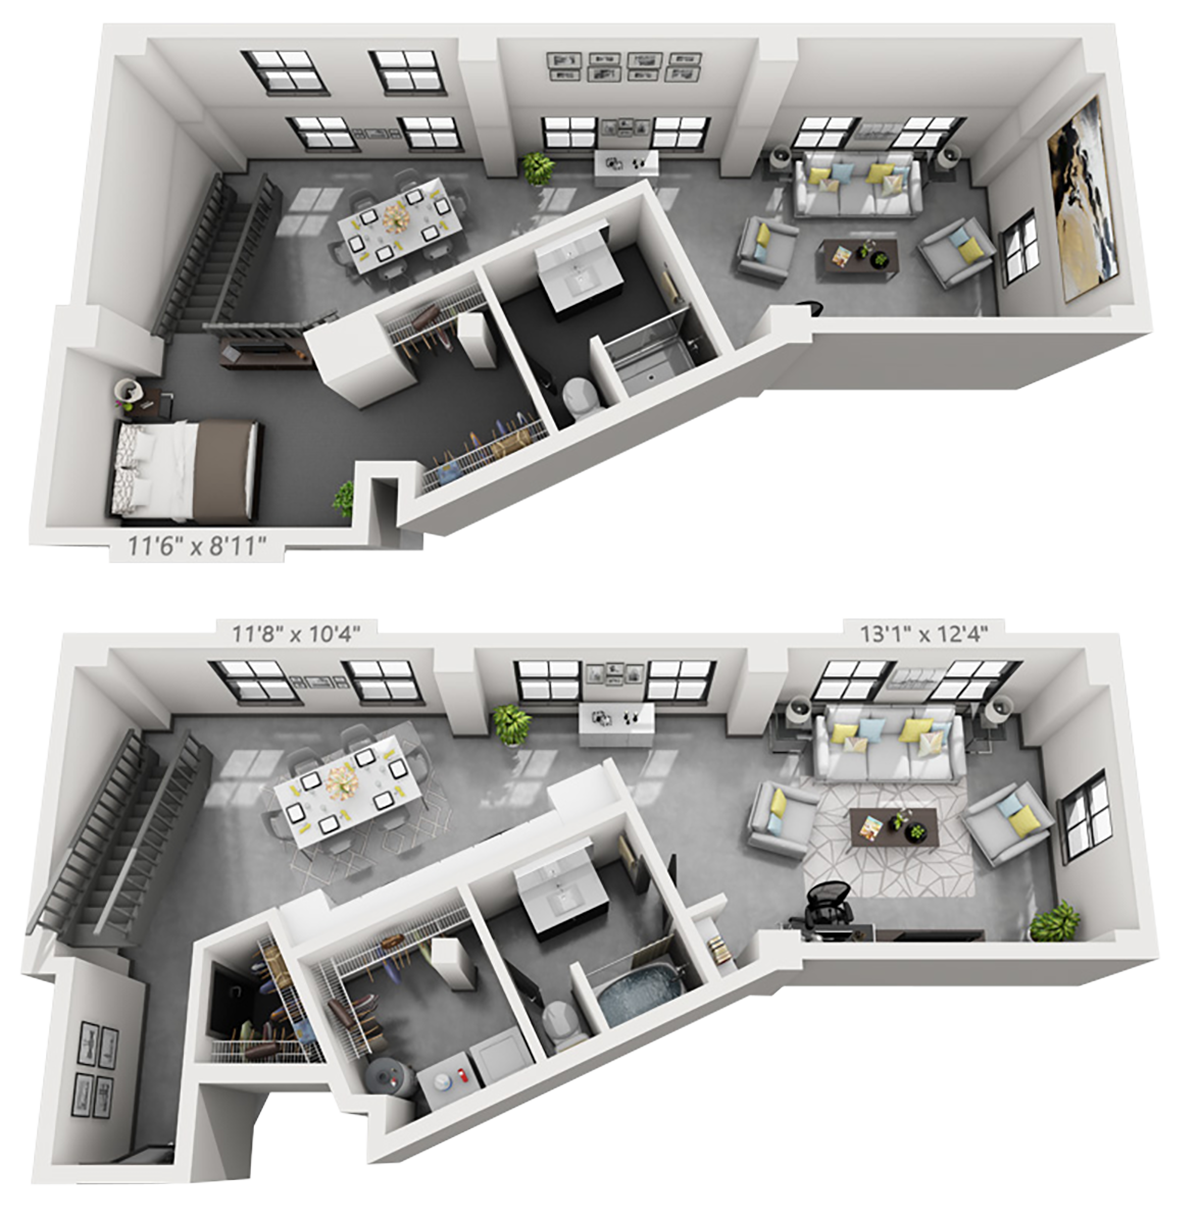 B10M plan is 1 bed, 2 bath and 1,367 square feet